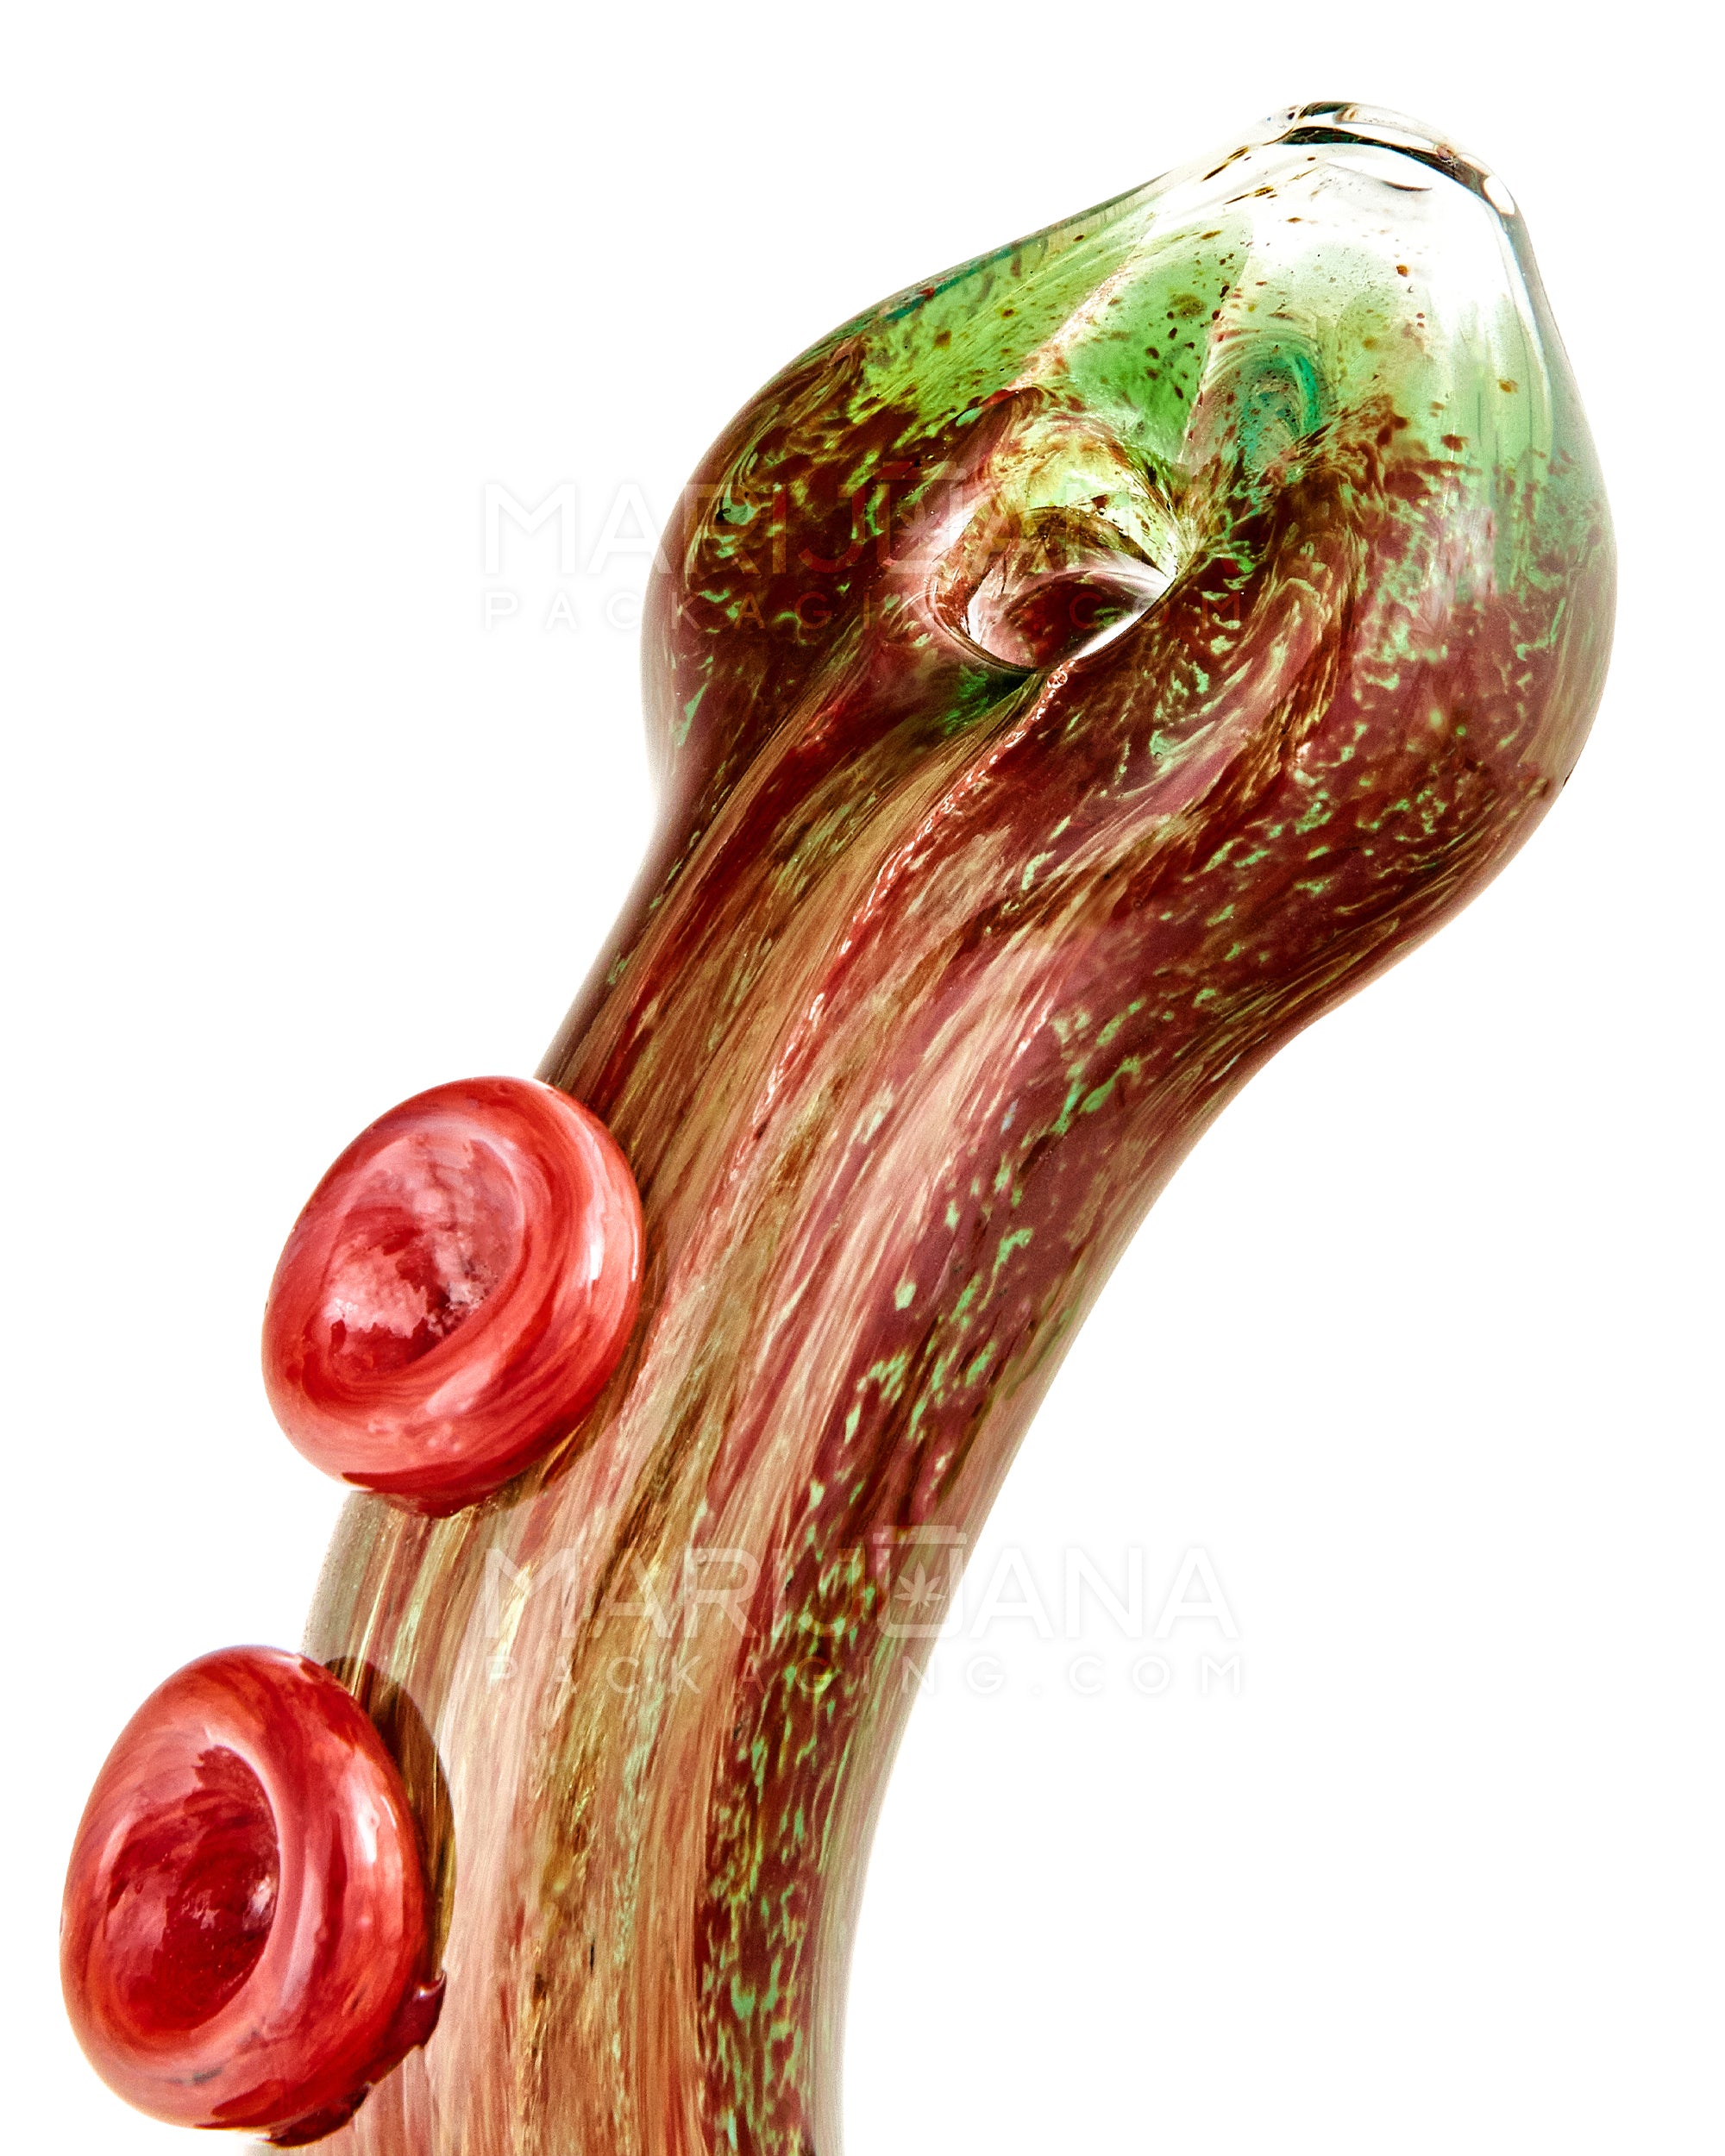 Heady | Donut Mouth Color Pull Kraken Bubbler w/ Triple Tentacles | 9in Tall - Glass - Red & Green - 6